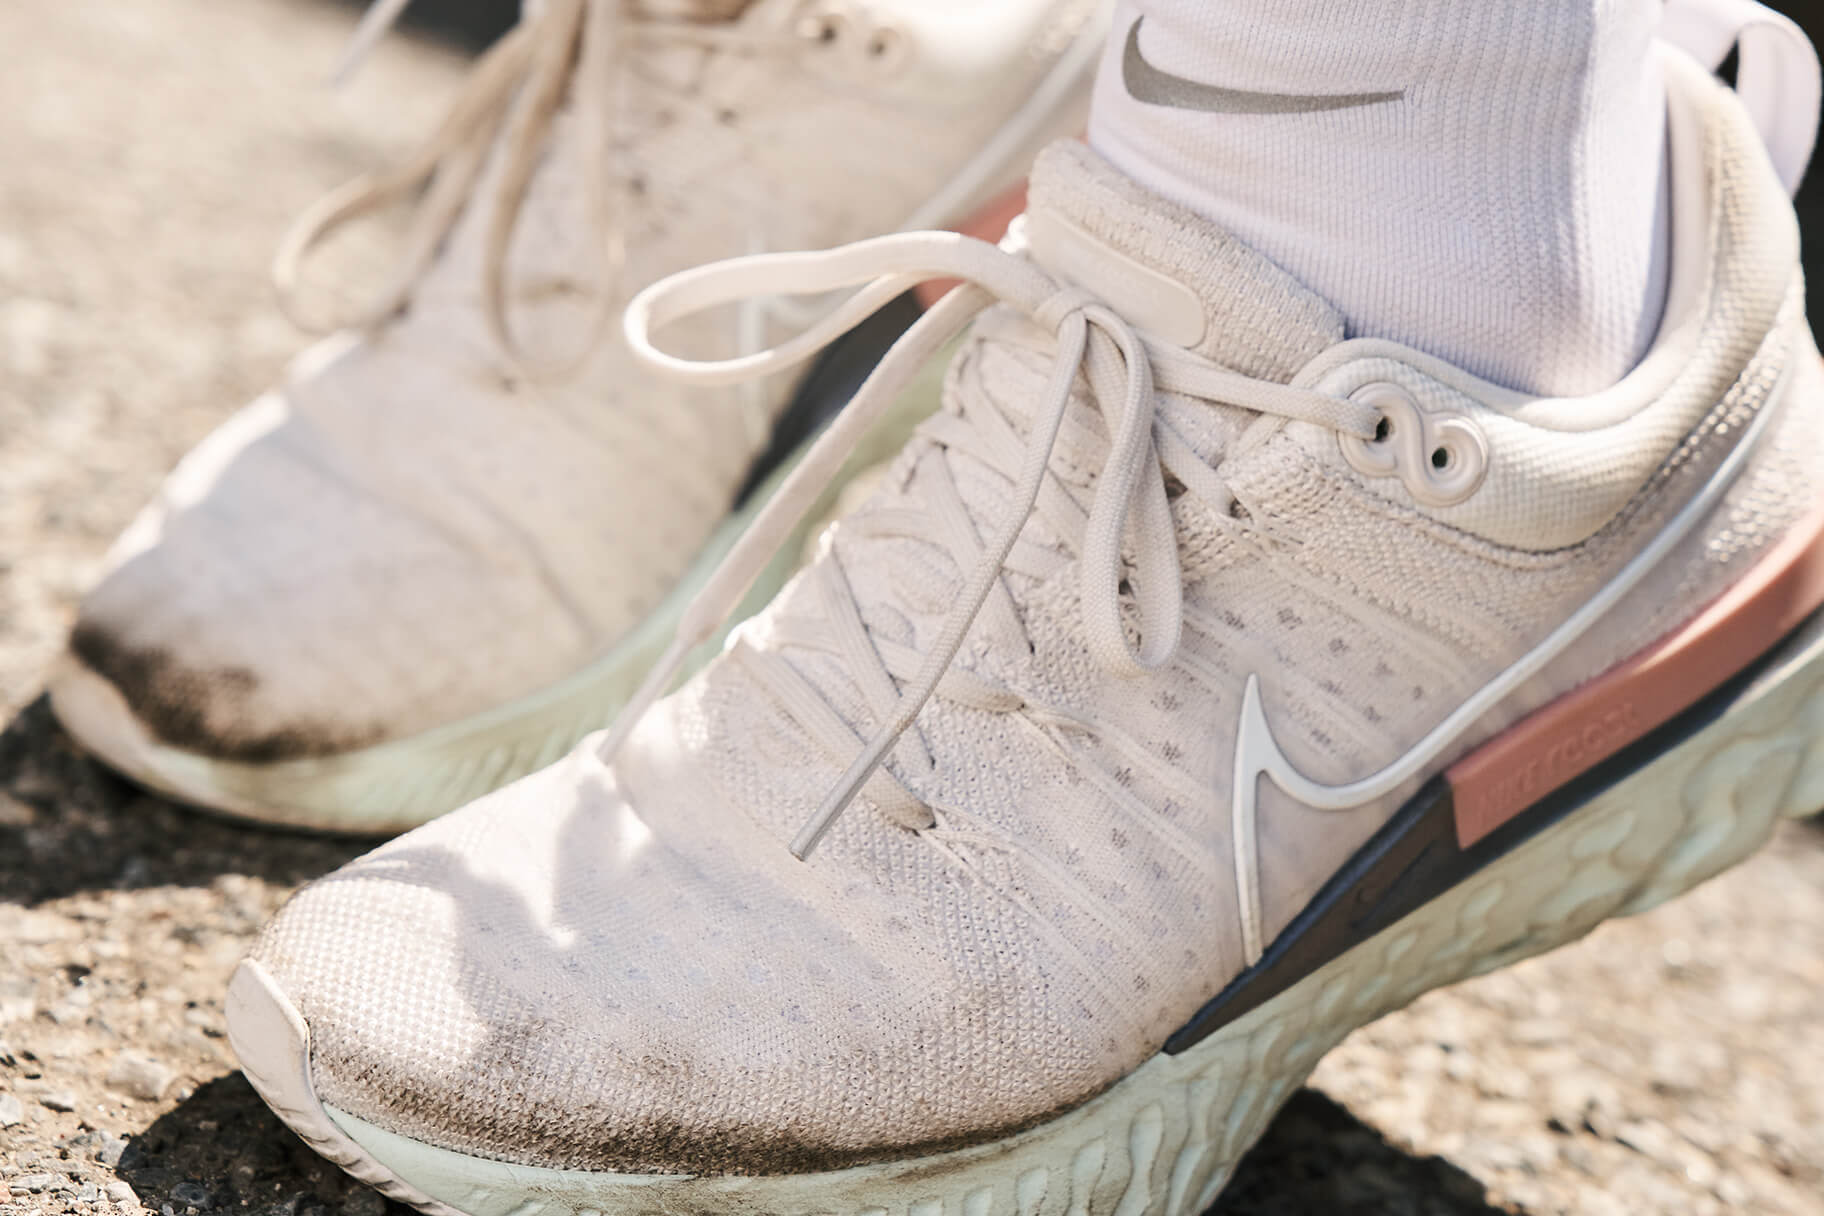 How often should I replace my running shoes?